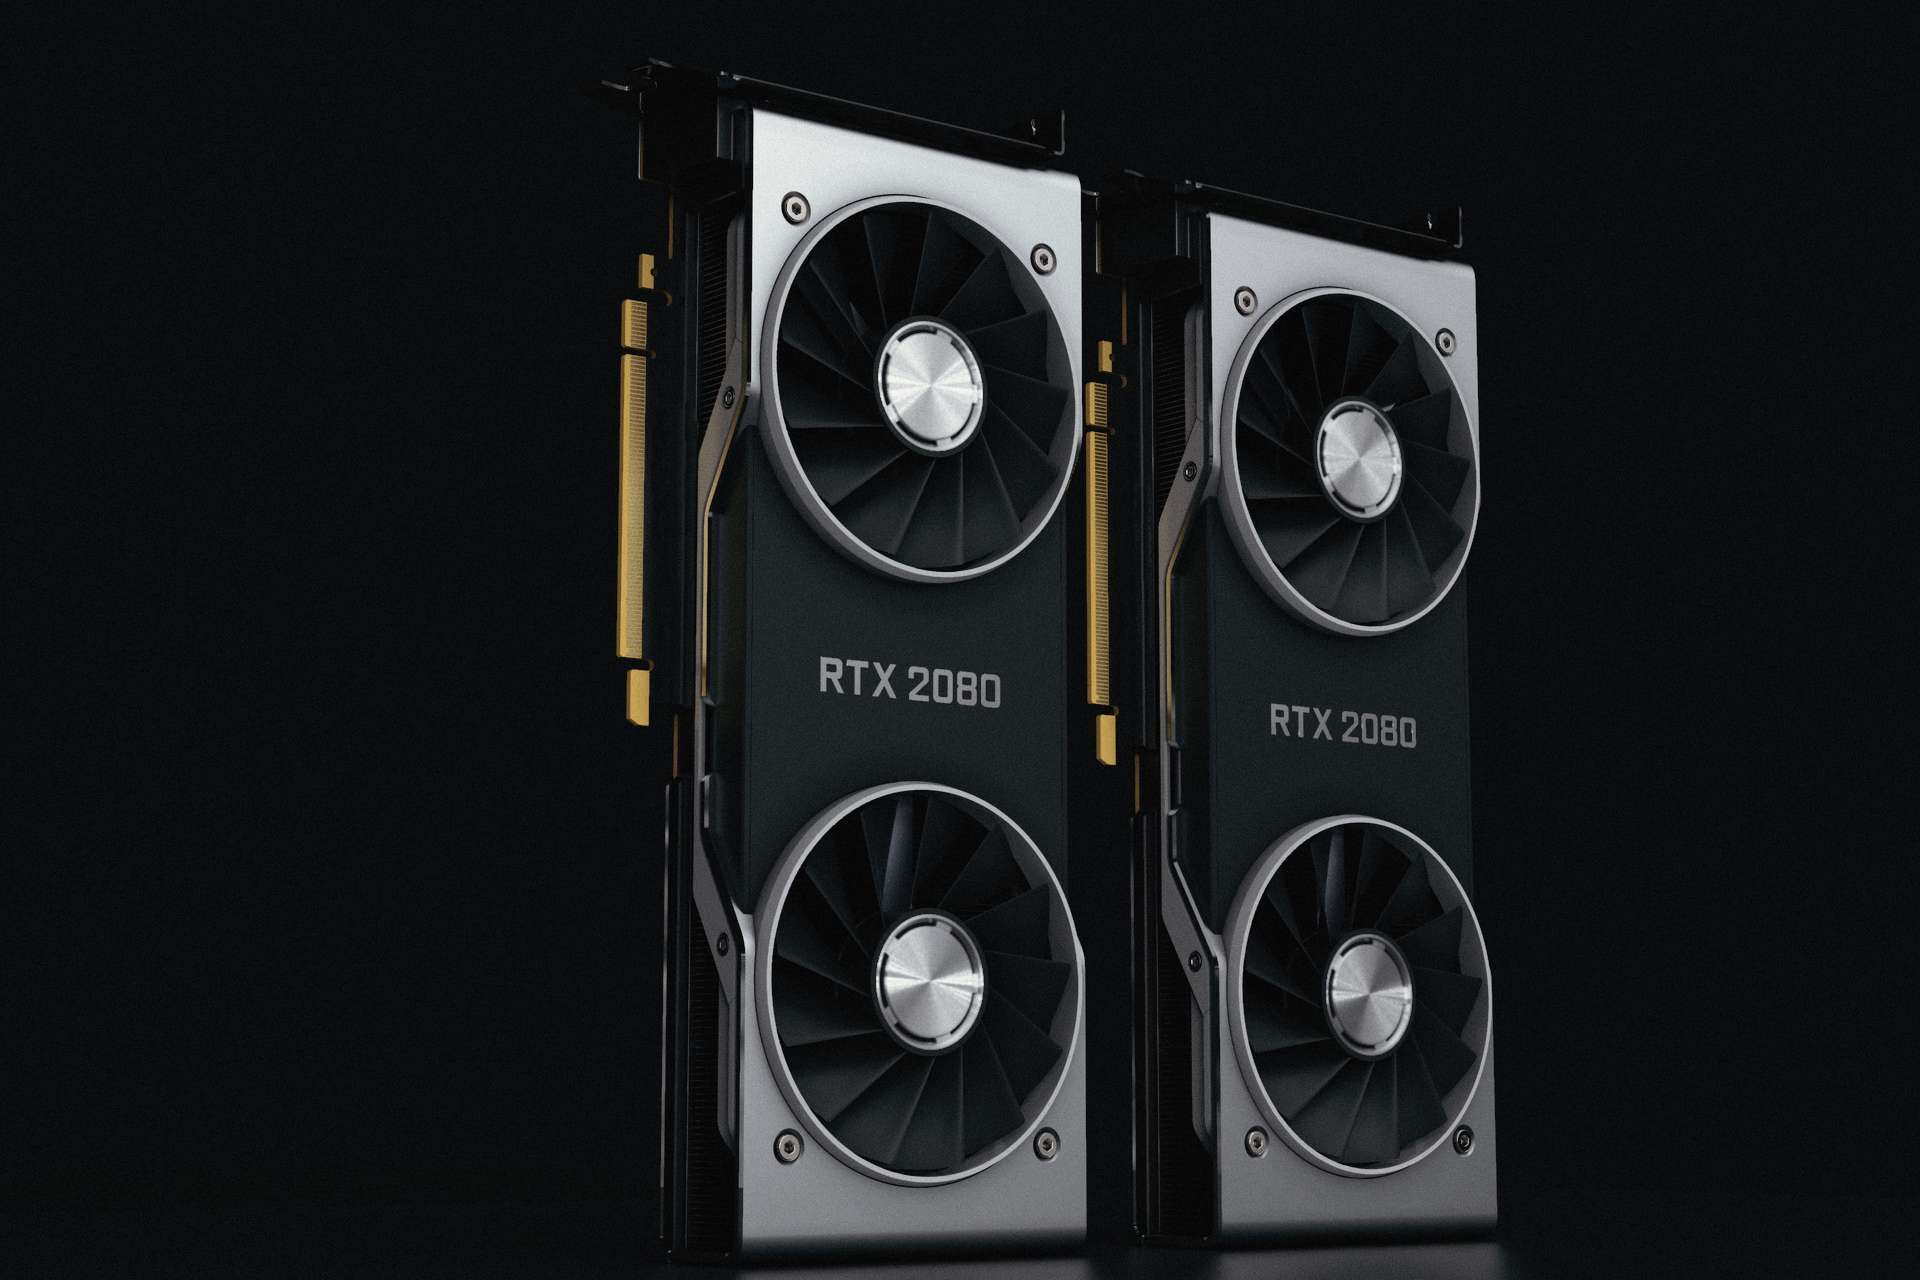 Two RTX 2080 graphics cards next to each other